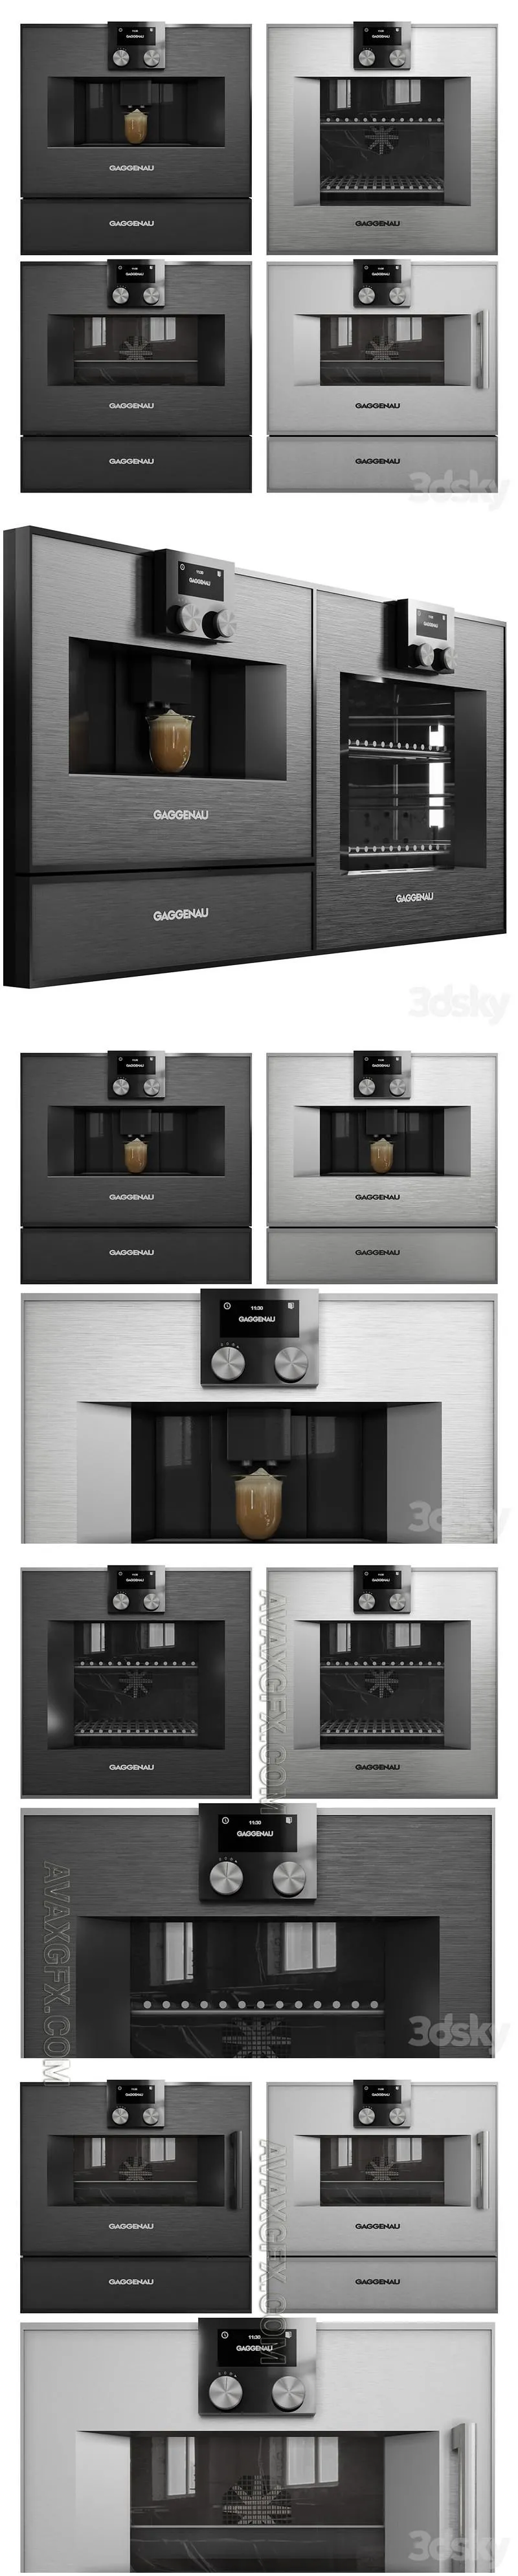 Gaggenau Oven Collection Vol 03 - 3D Model